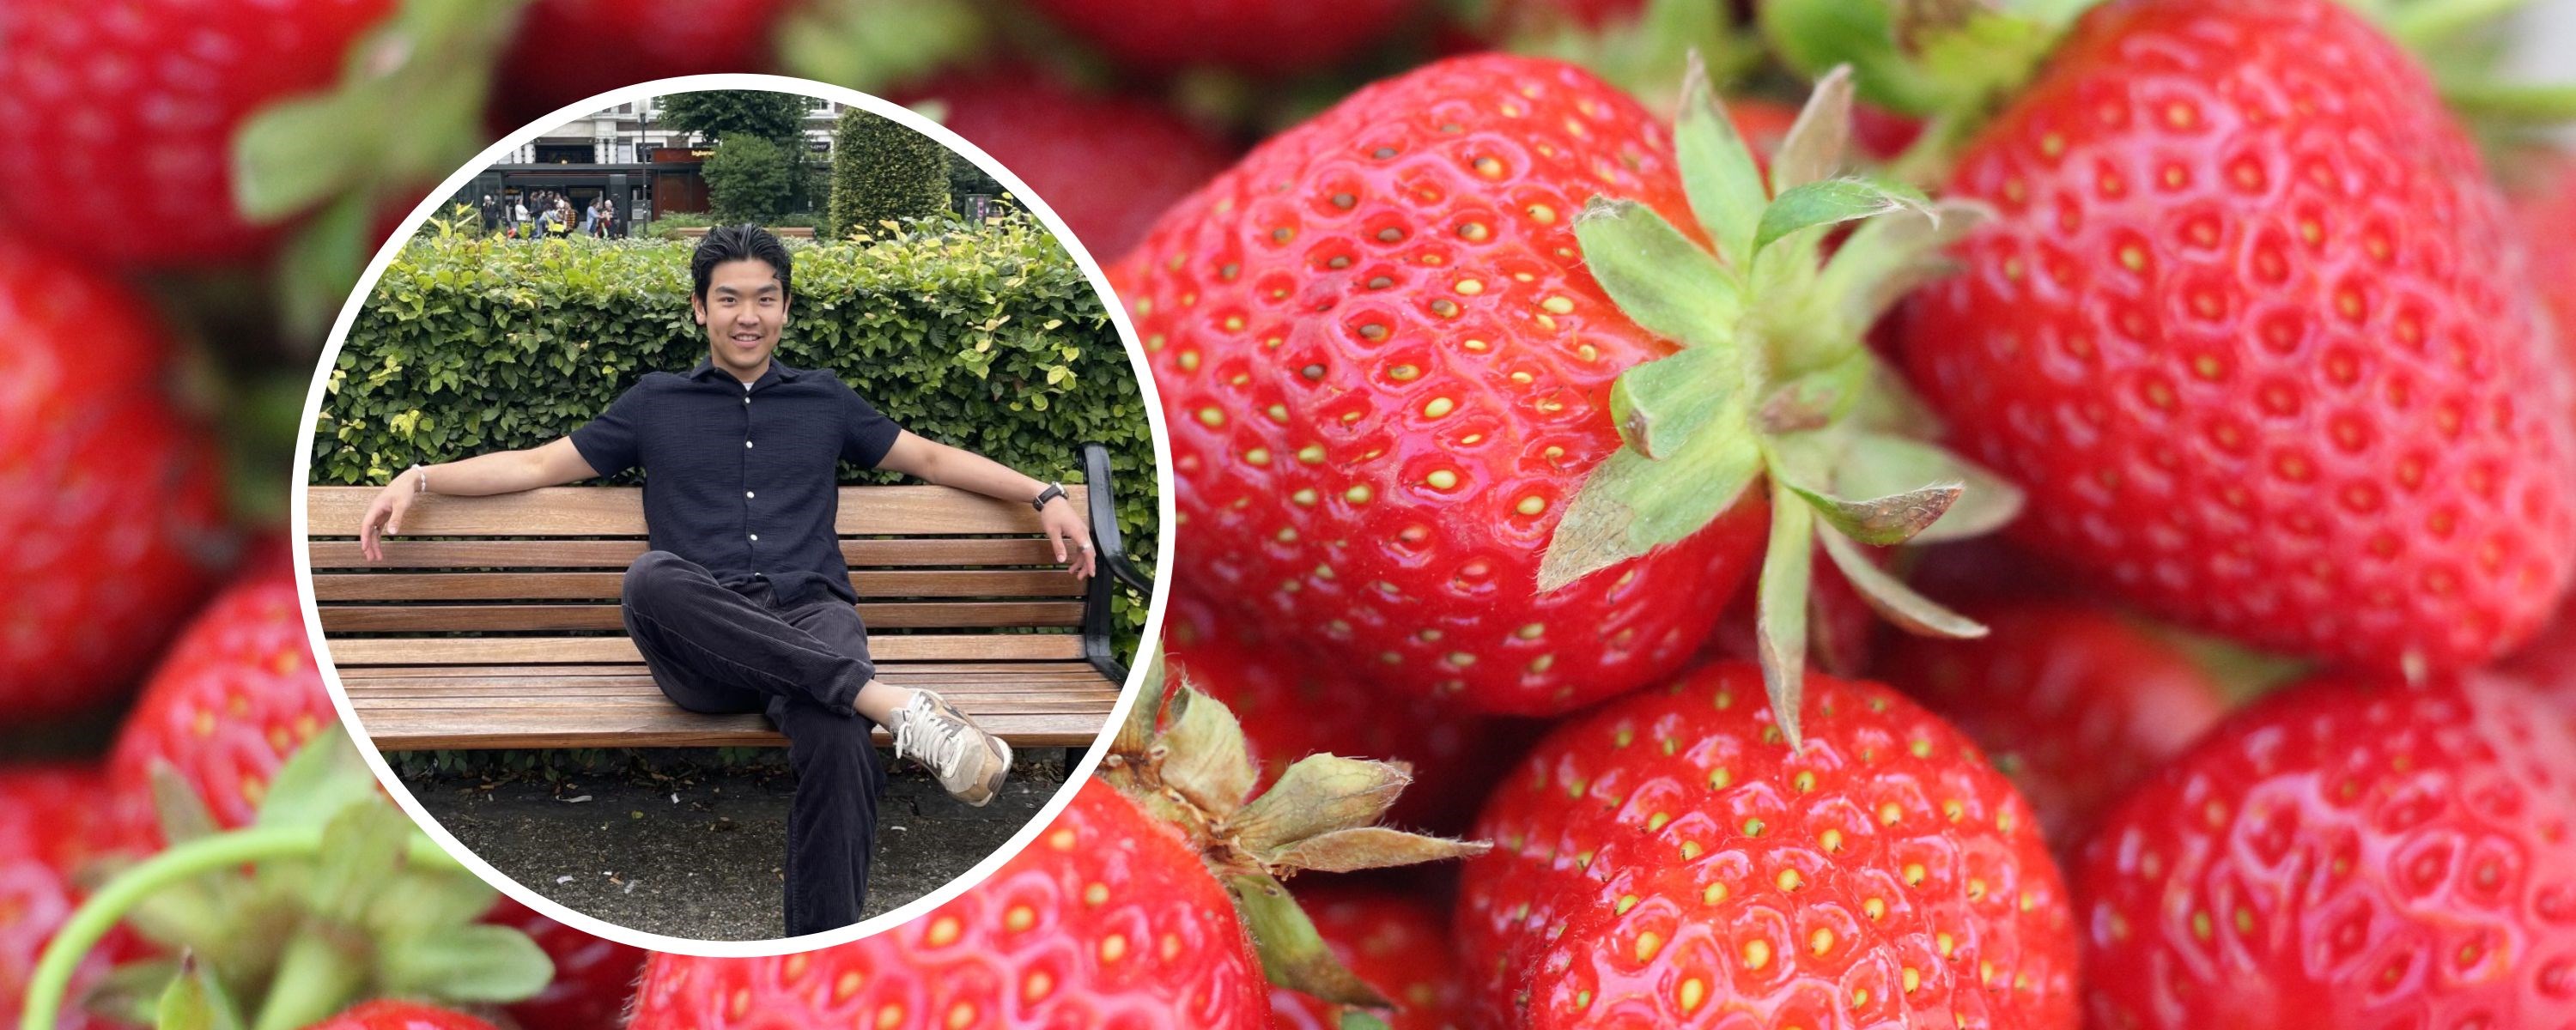 Picture of Erik Tien Huynh and close-up picture of strawberries. Photo: private & Pexels/David Boozer